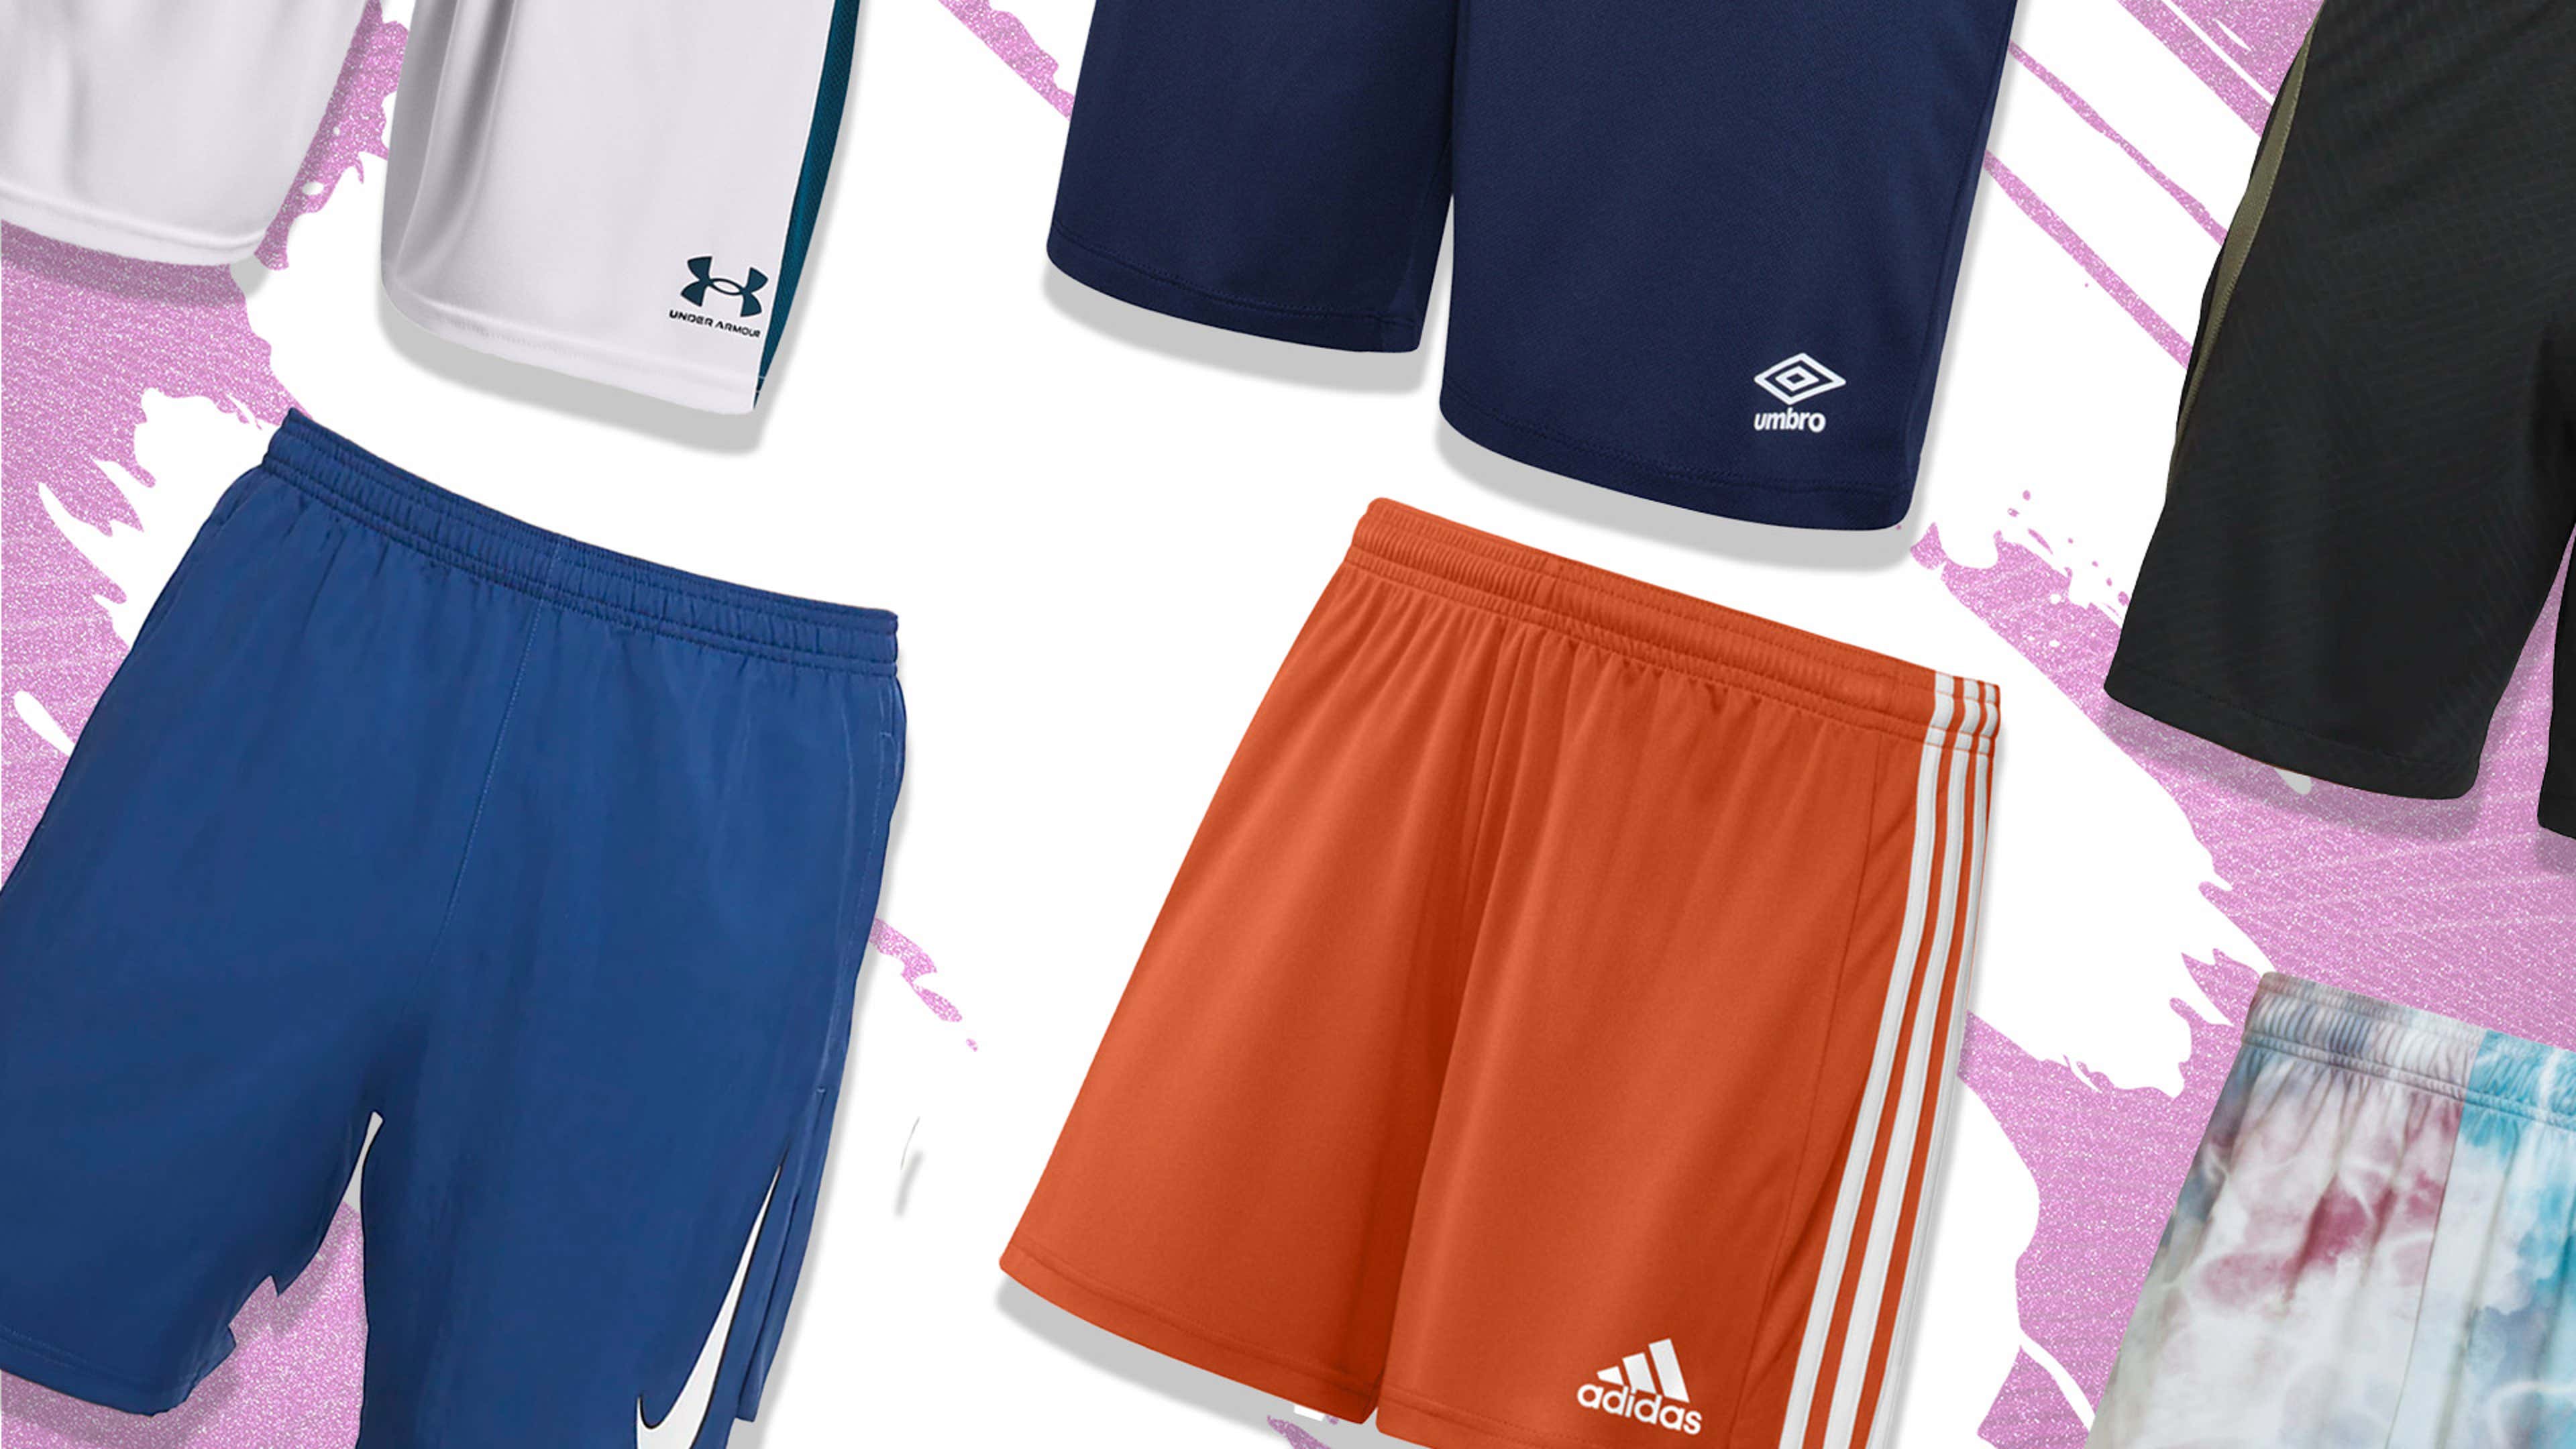 Slang Tenen Correct The best men's football shorts you can buy in 2022 | Goal.com US